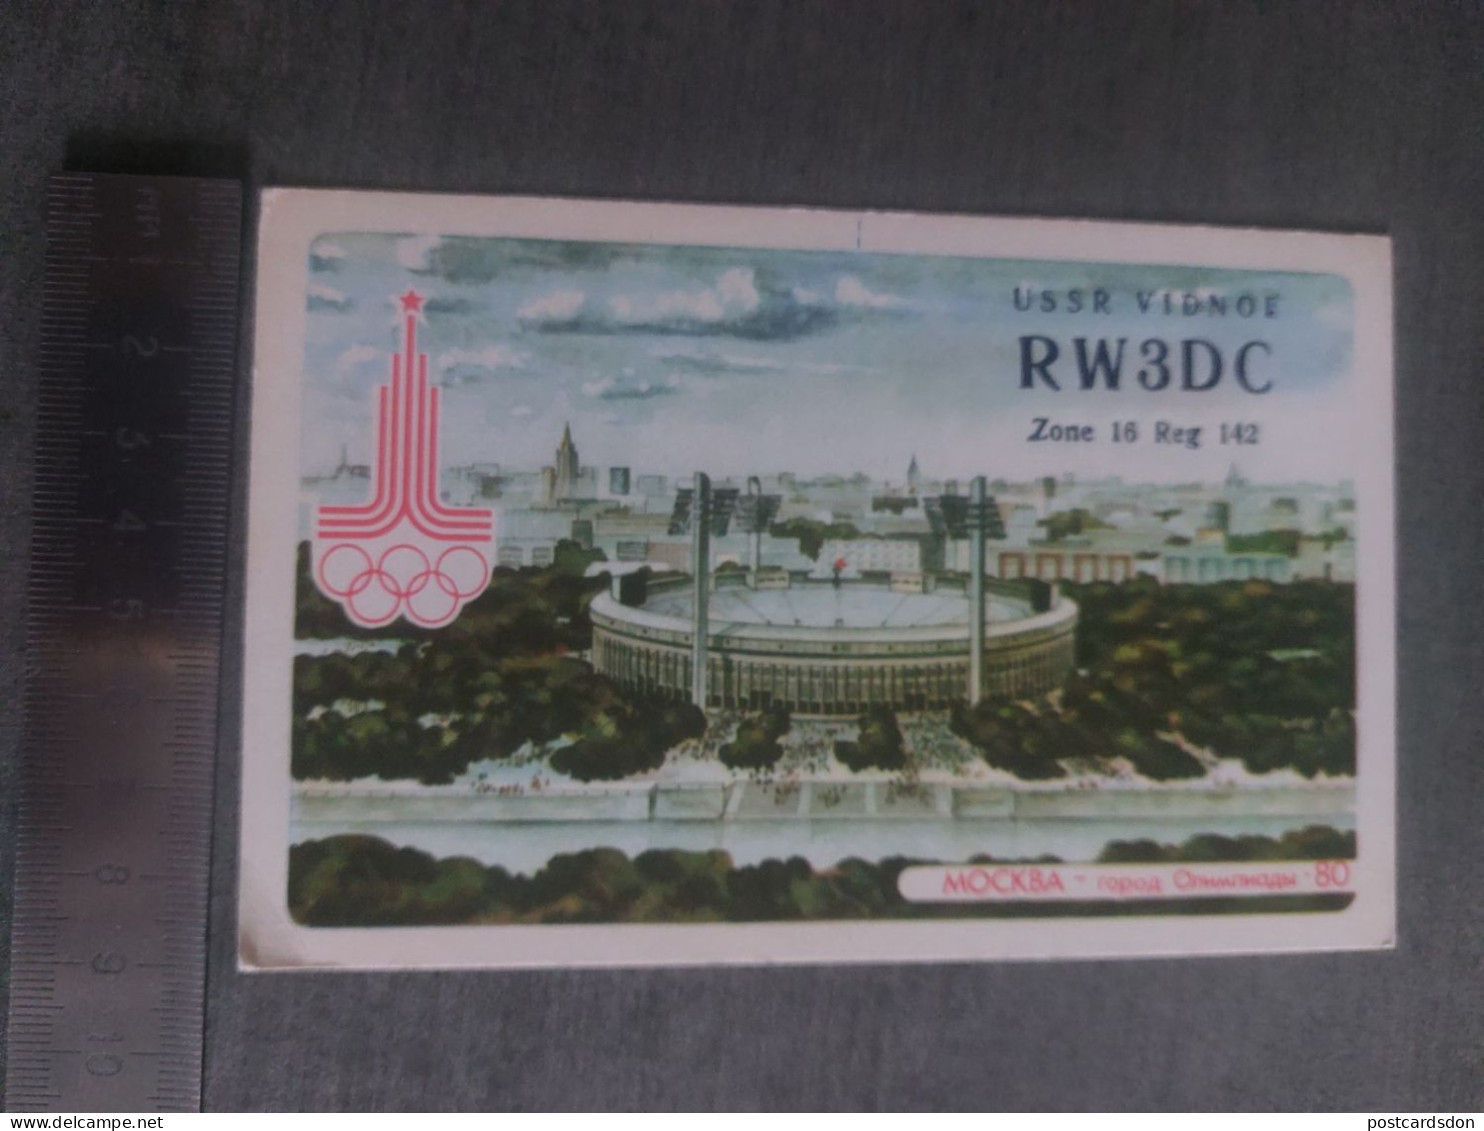 RUSSIA.  MOSCOW CENTRAL  STADIUM - STADE -  Panorama - Old USSR Radio PC 1984 QSL - Stadi